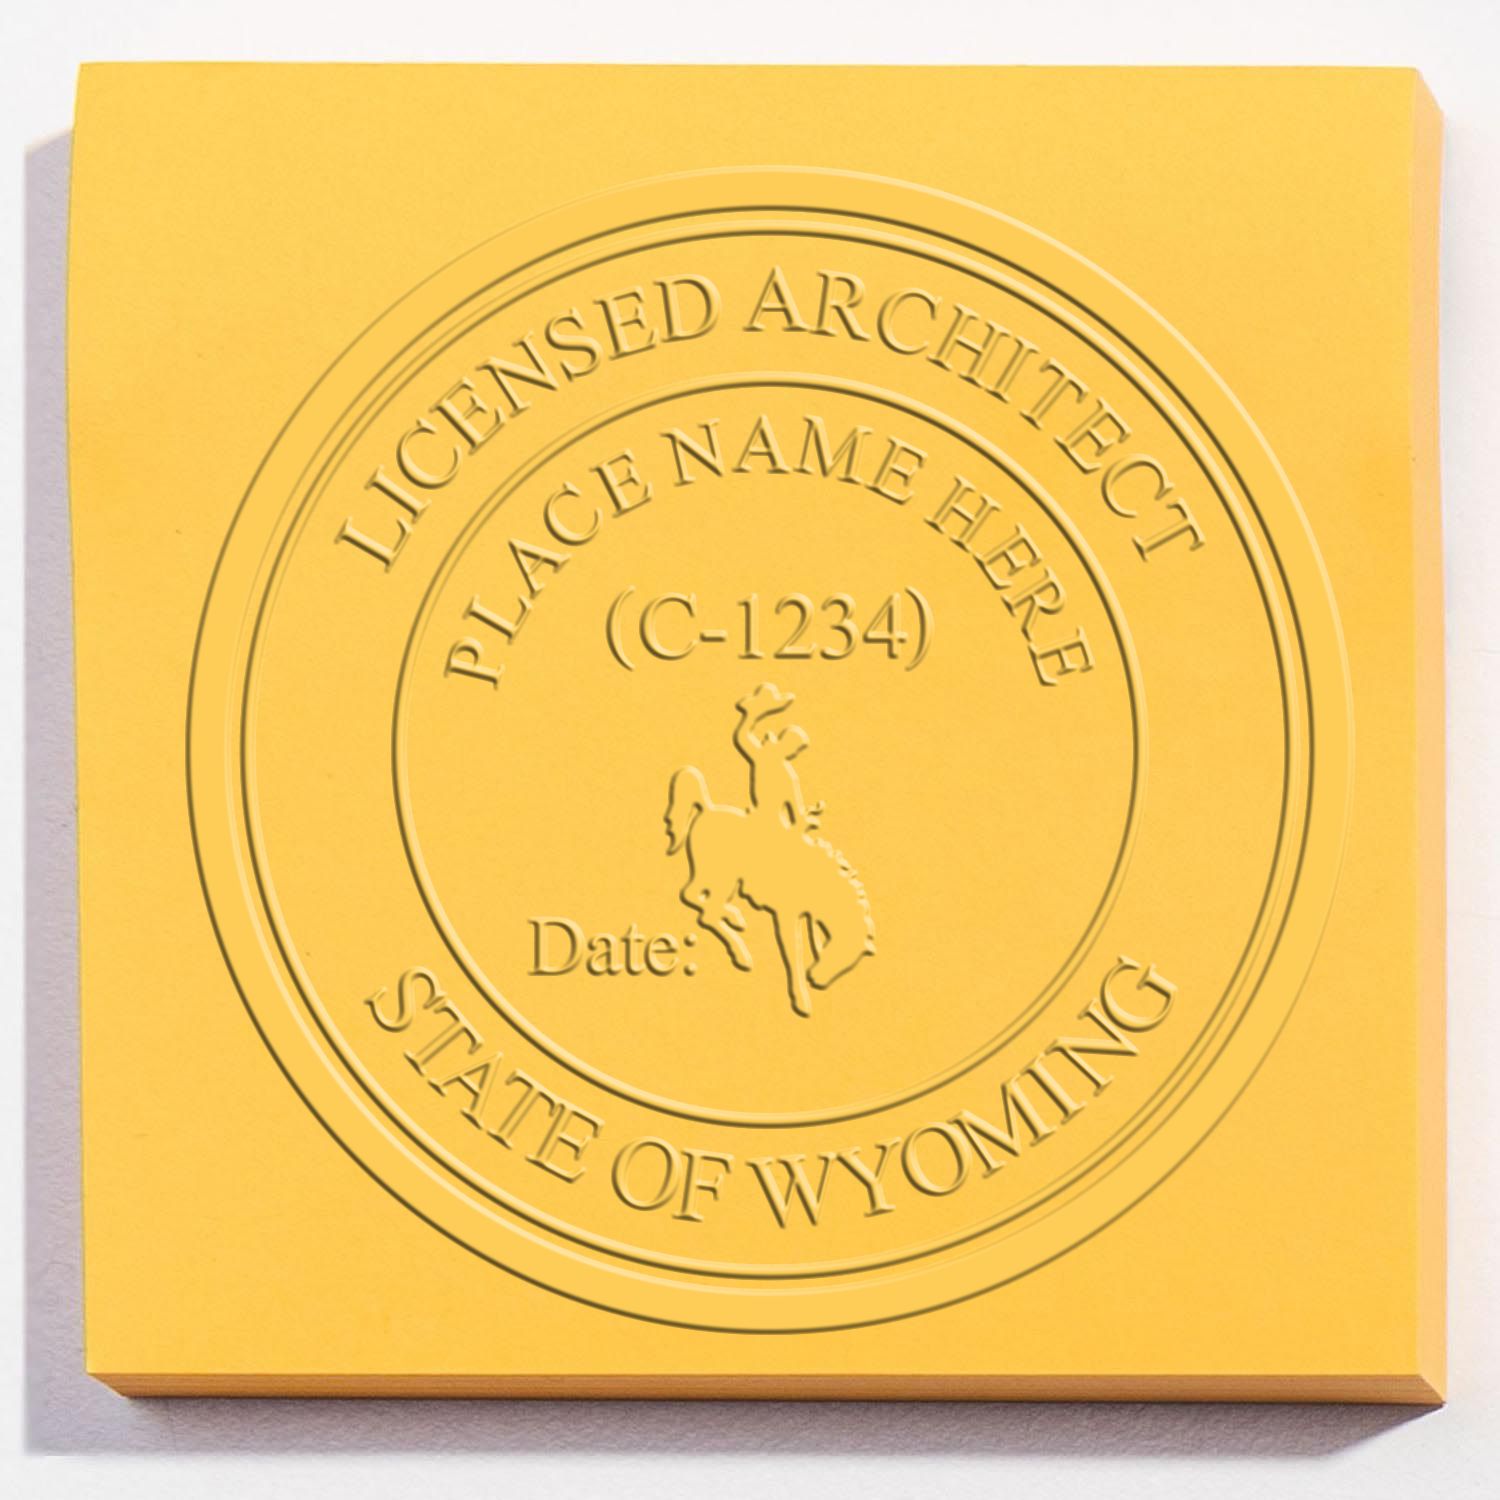 An in use photo of the Hybrid Wyoming Architect Seal showing a sample imprint on a cardstock